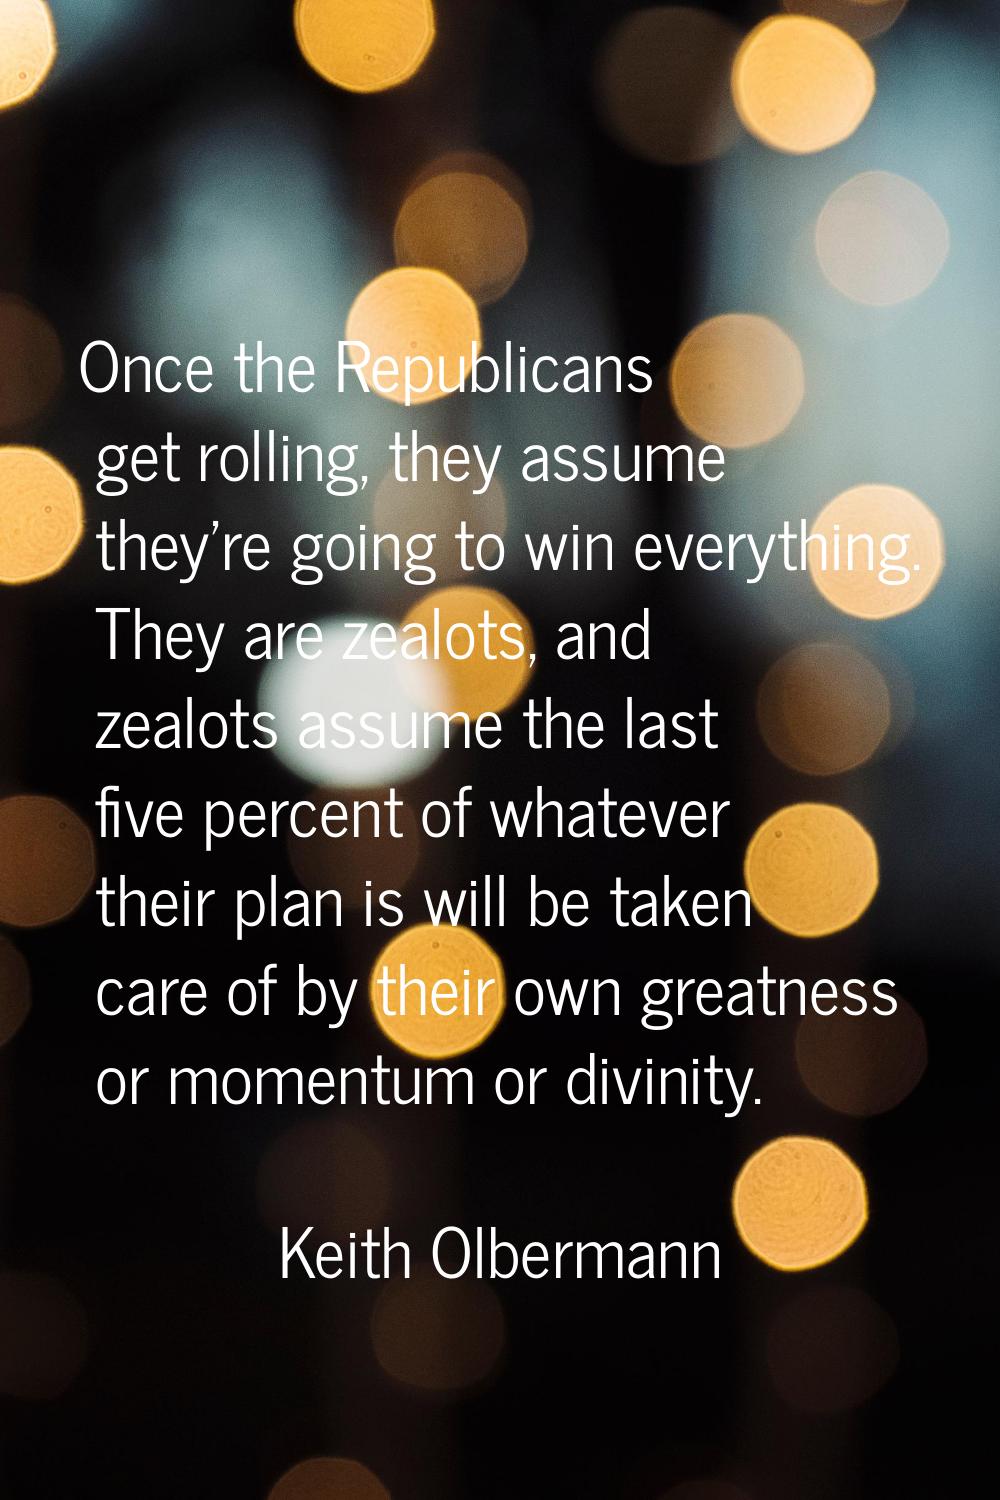 Once the Republicans get rolling, they assume they're going to win everything. They are zealots, an